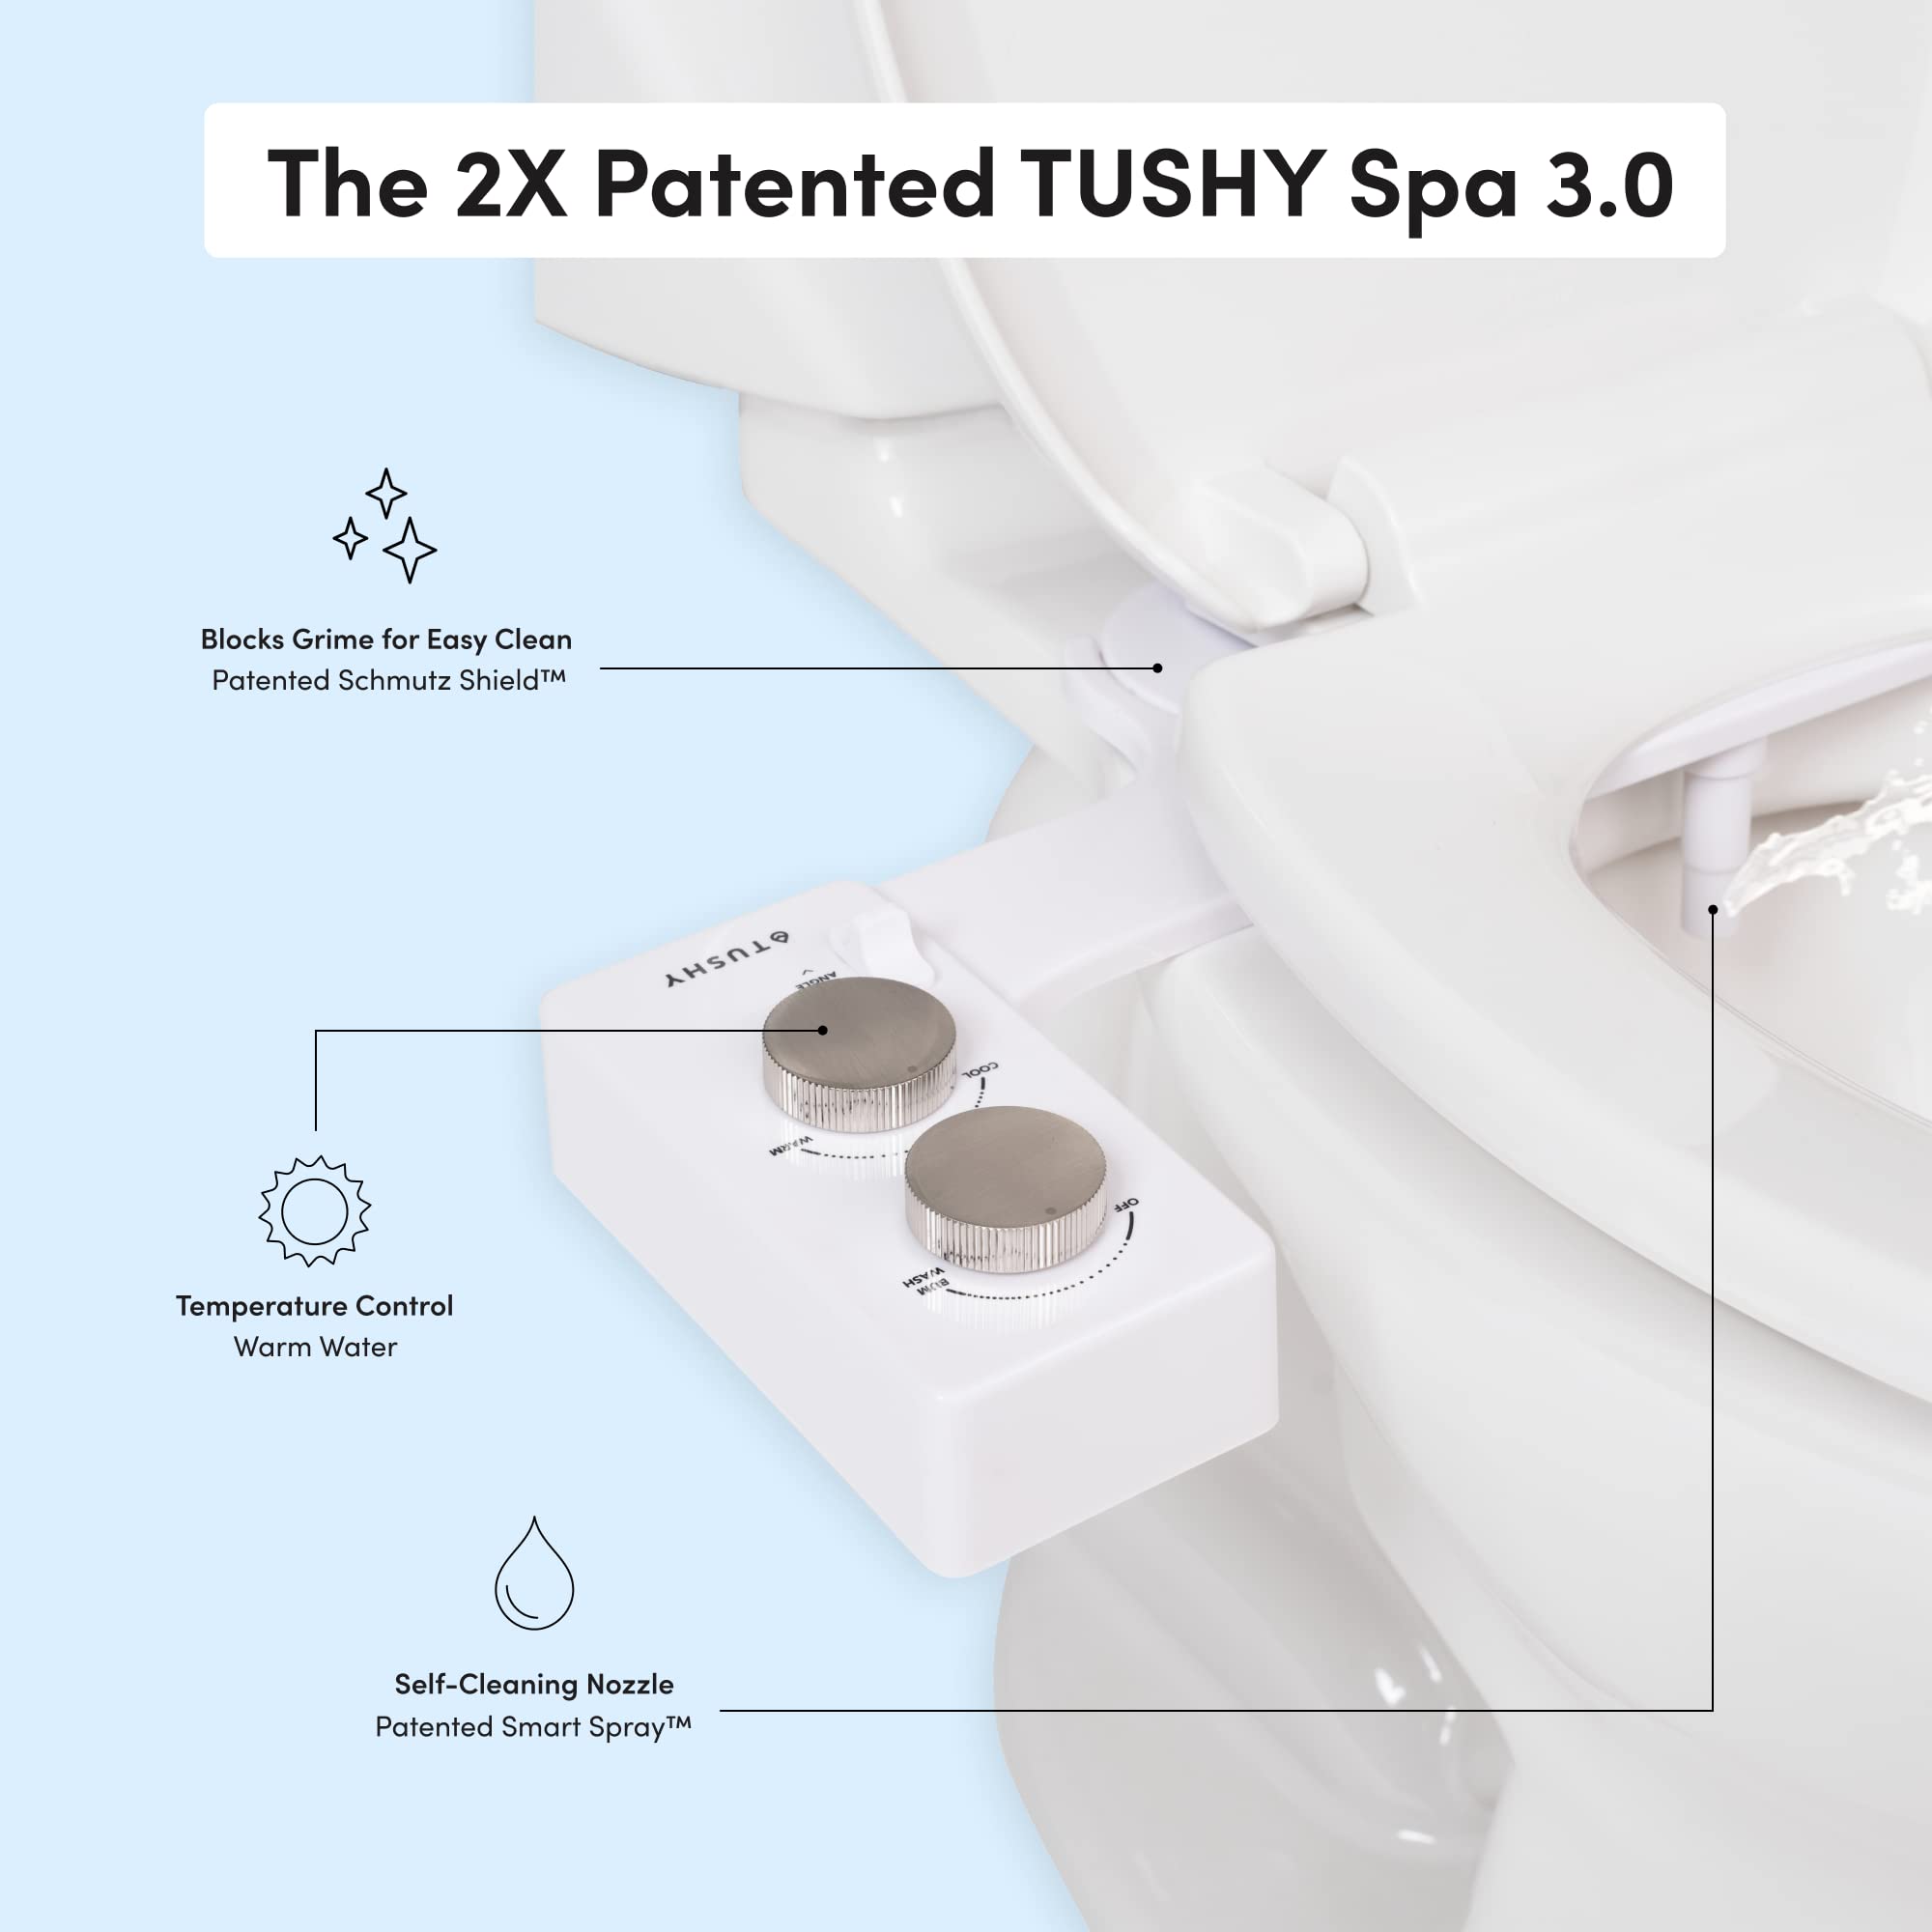 Tushy Warm Water Spa Bidet Attachment | Self Cleaning Fresh Water Sprayer +Adjustable Pressure Nozzle, Angle Control, (Adjustable Cool to Warm Water Temperature Option), Platinum Knobs